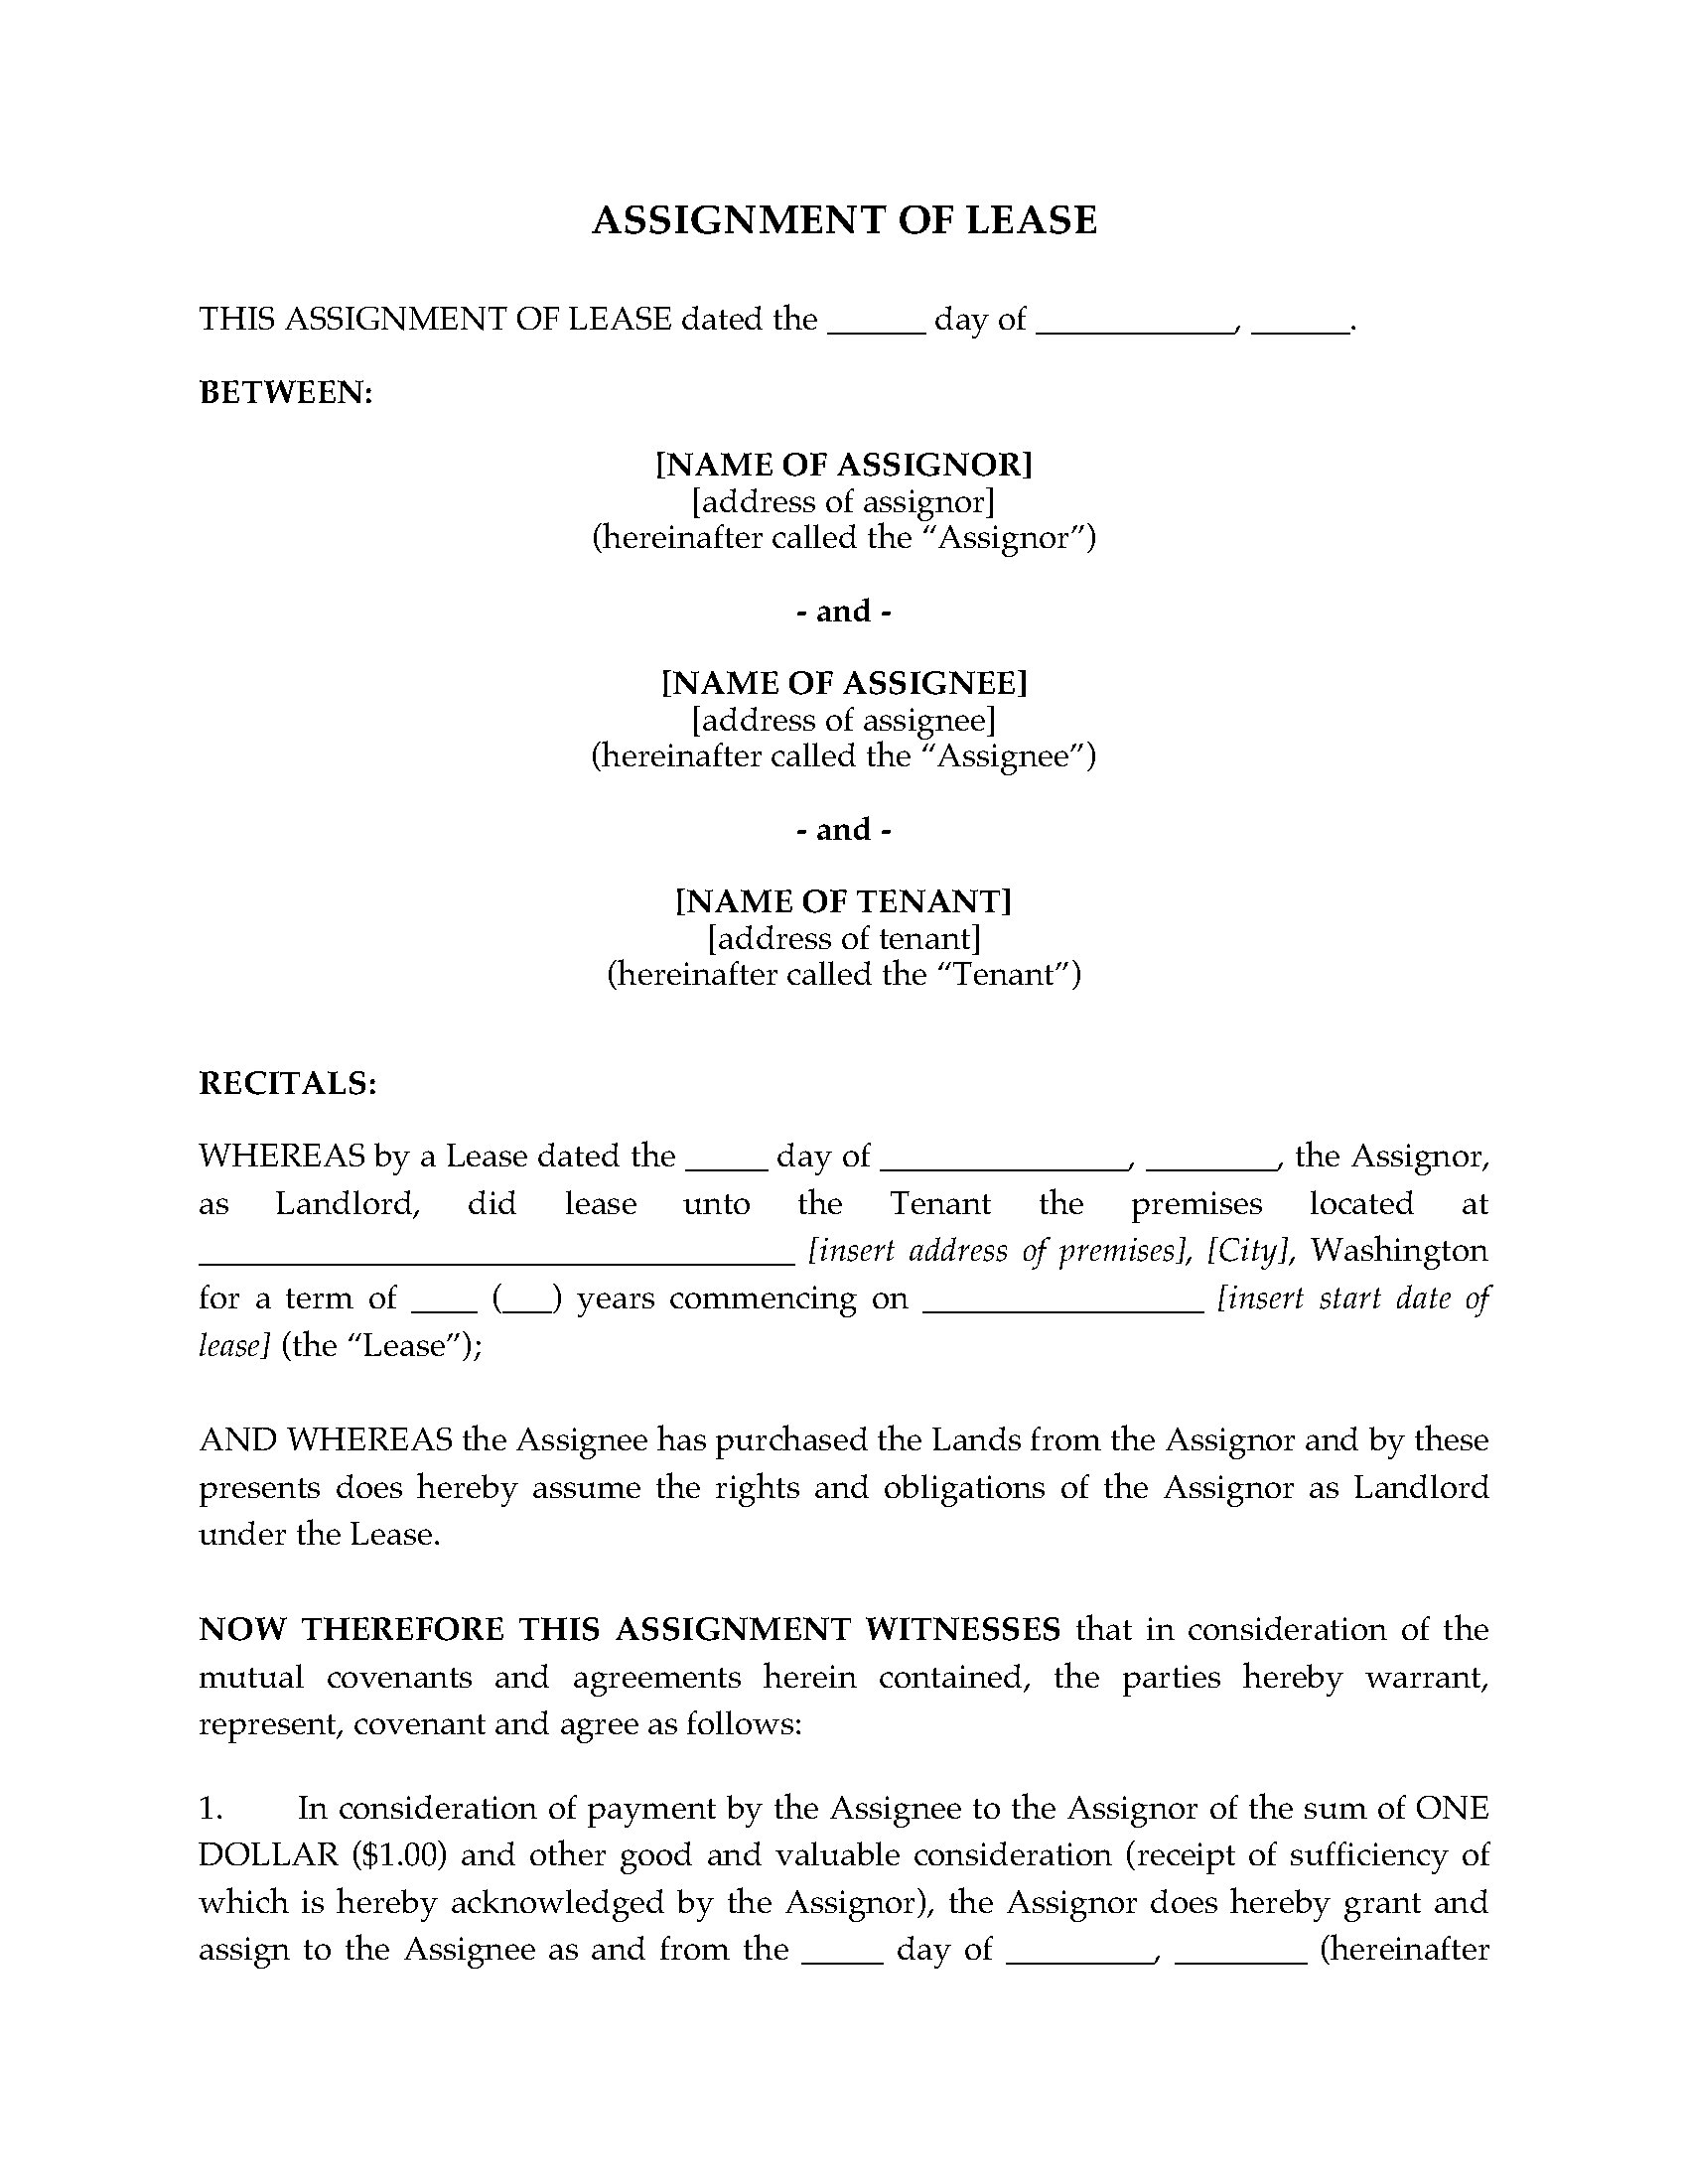 assignment of lease case law